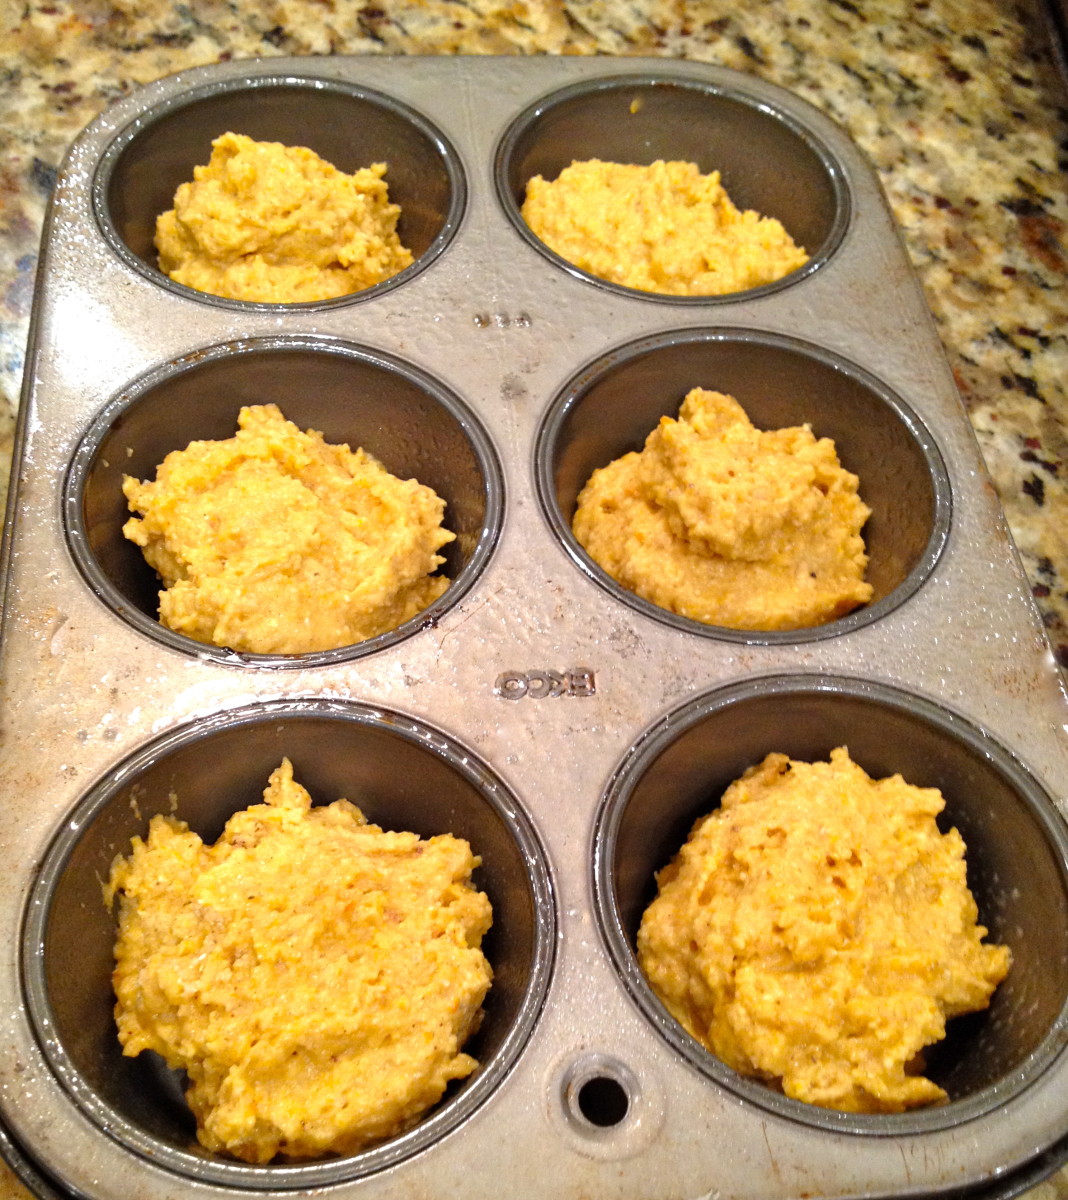 Spoon batter into 12 muffin tins or a pan coated with cooking spray. Bake in the oven for about 12 minutes.